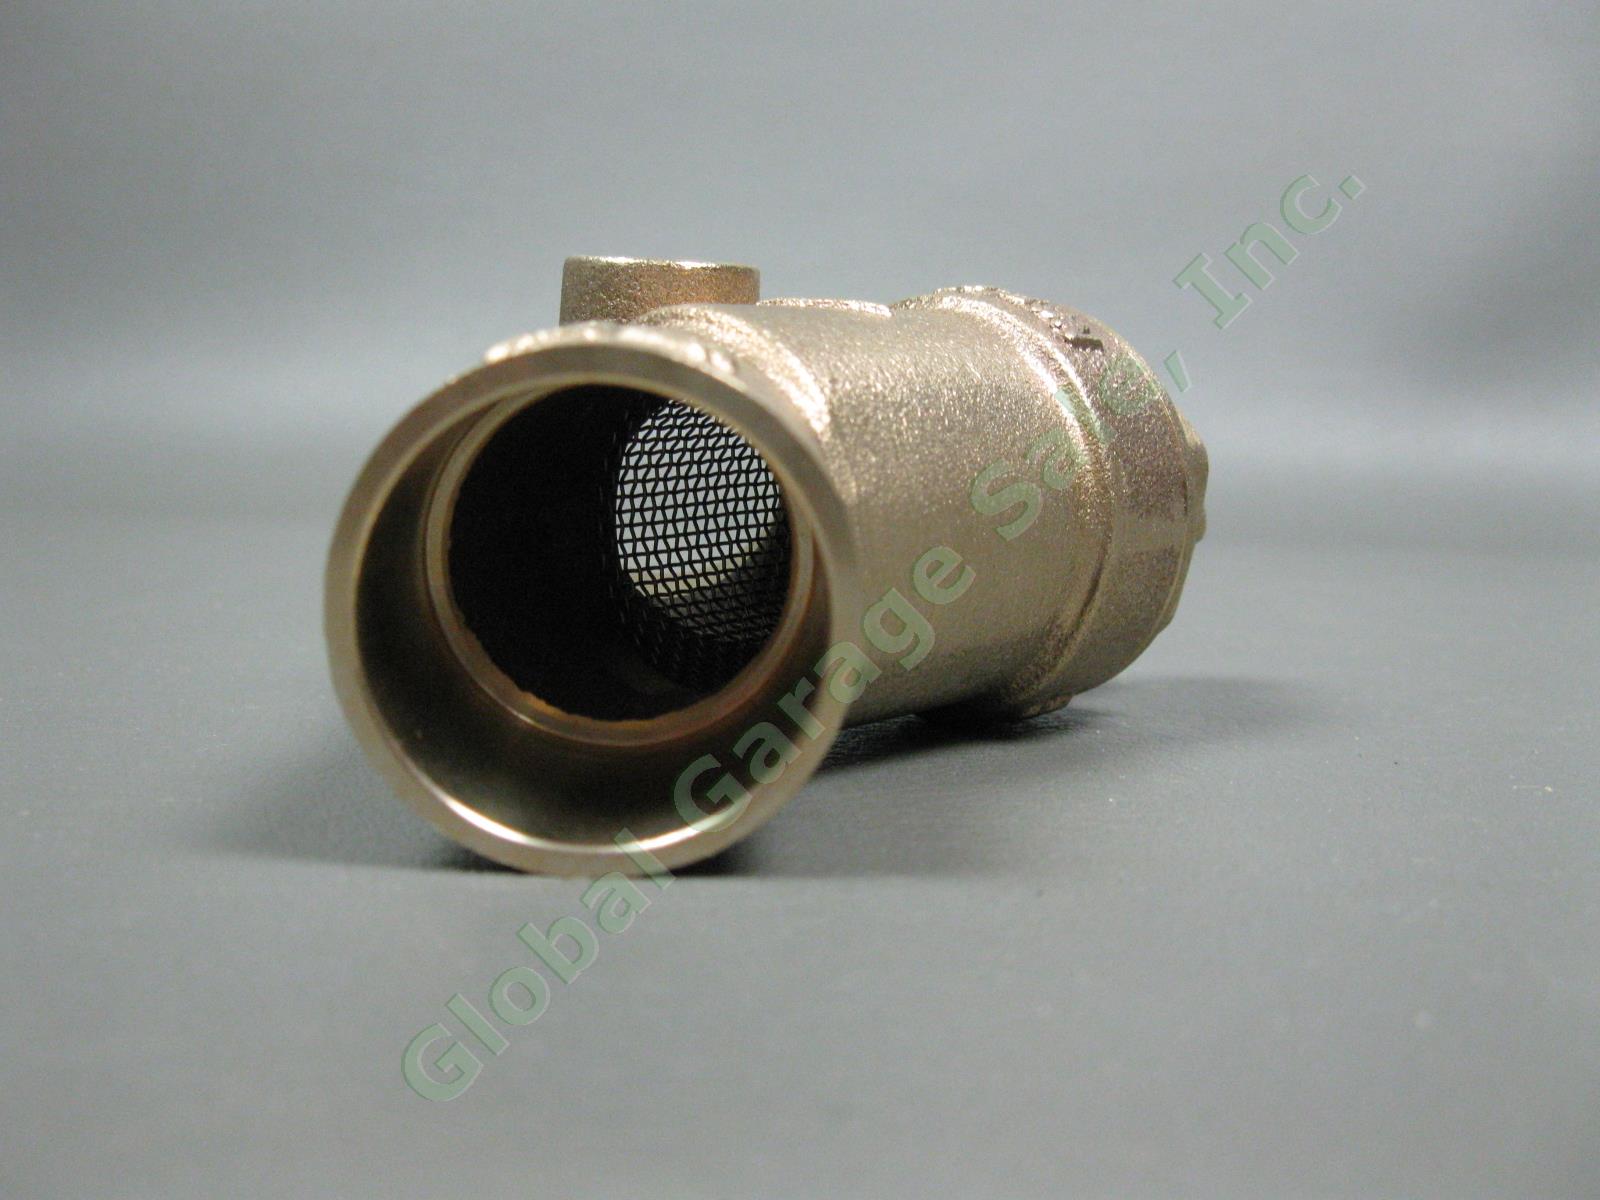 NEW Watts 1" LFS777SI Bronze Wye Strainer Lead-Free Pipe Connection Solder End 5